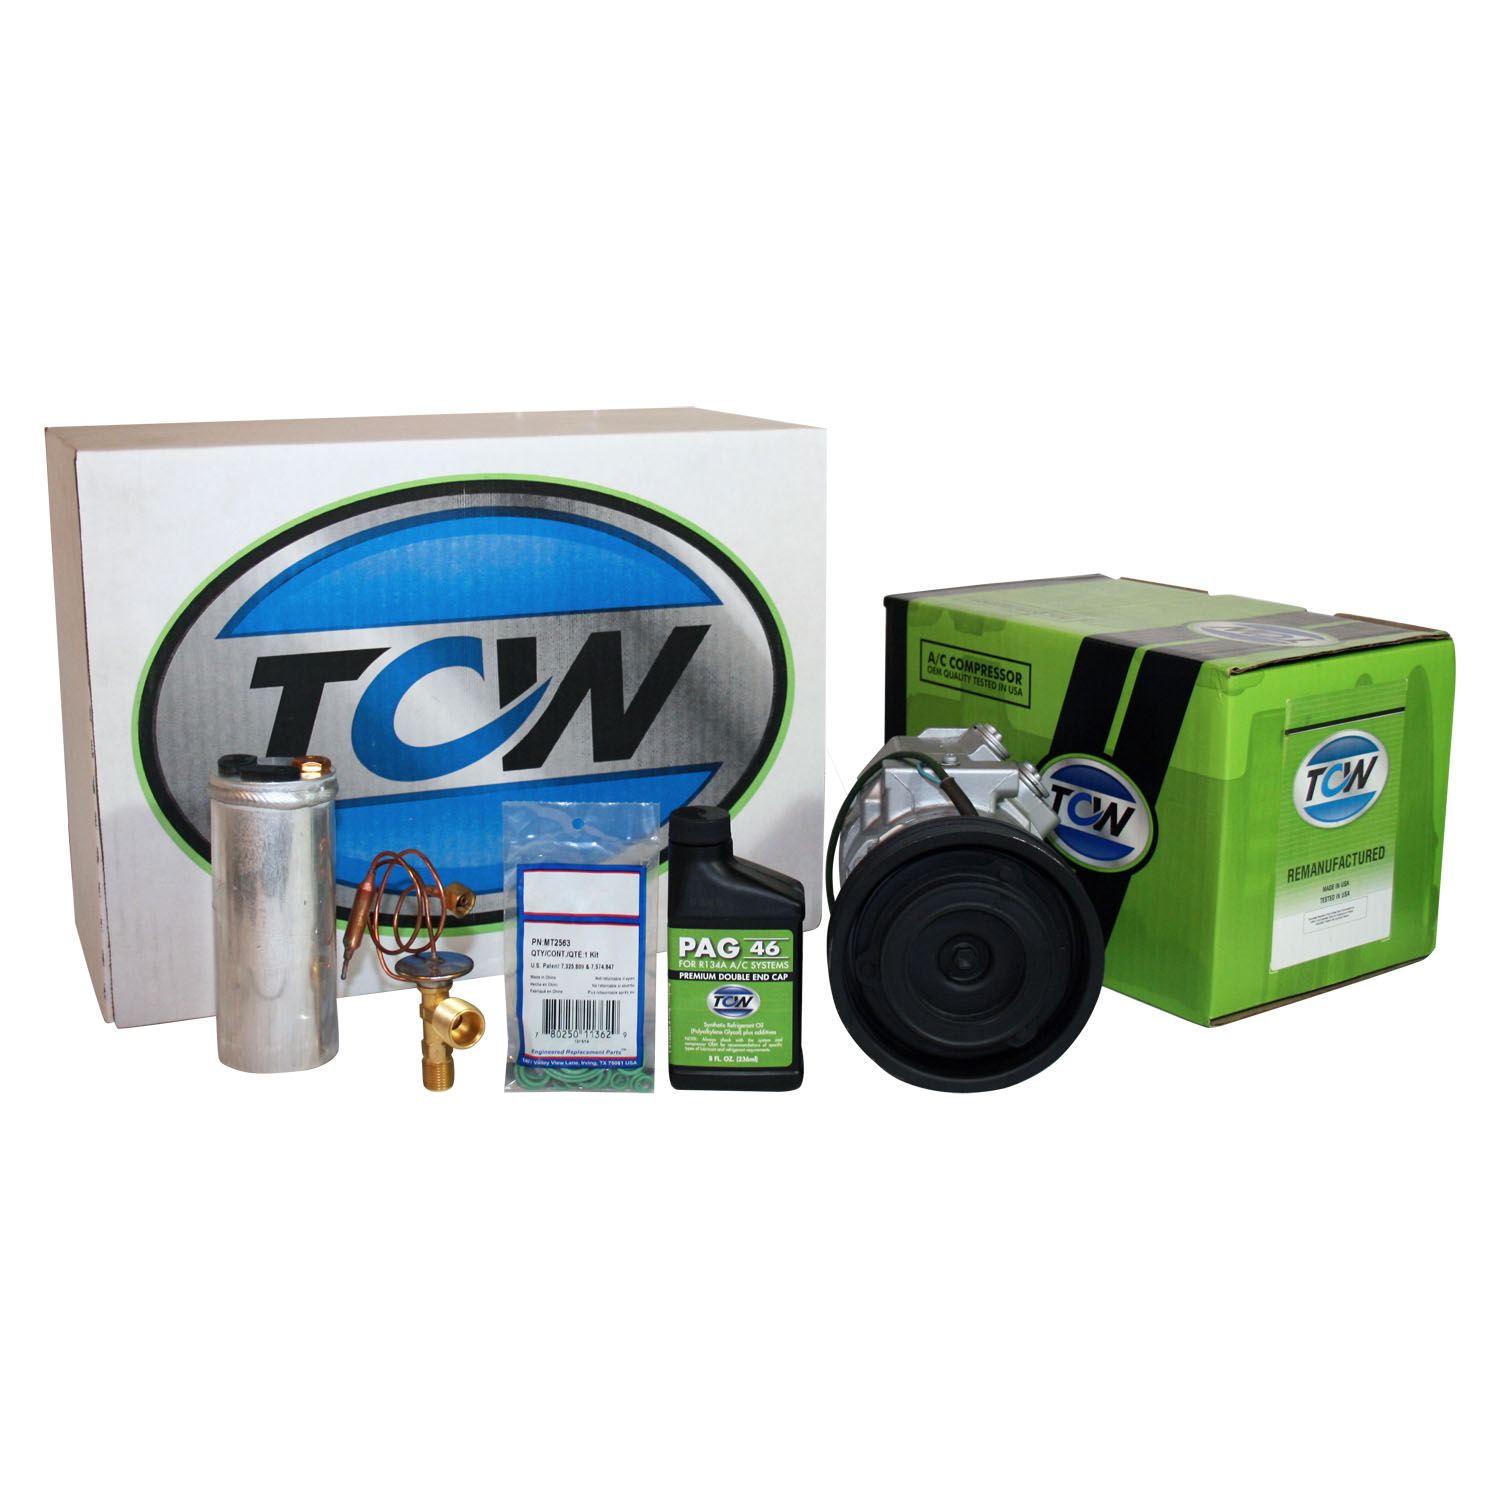 TCW Vehicle A/C Kit K1000449R Remanufactured Product Image field_60b6a13a6e67c